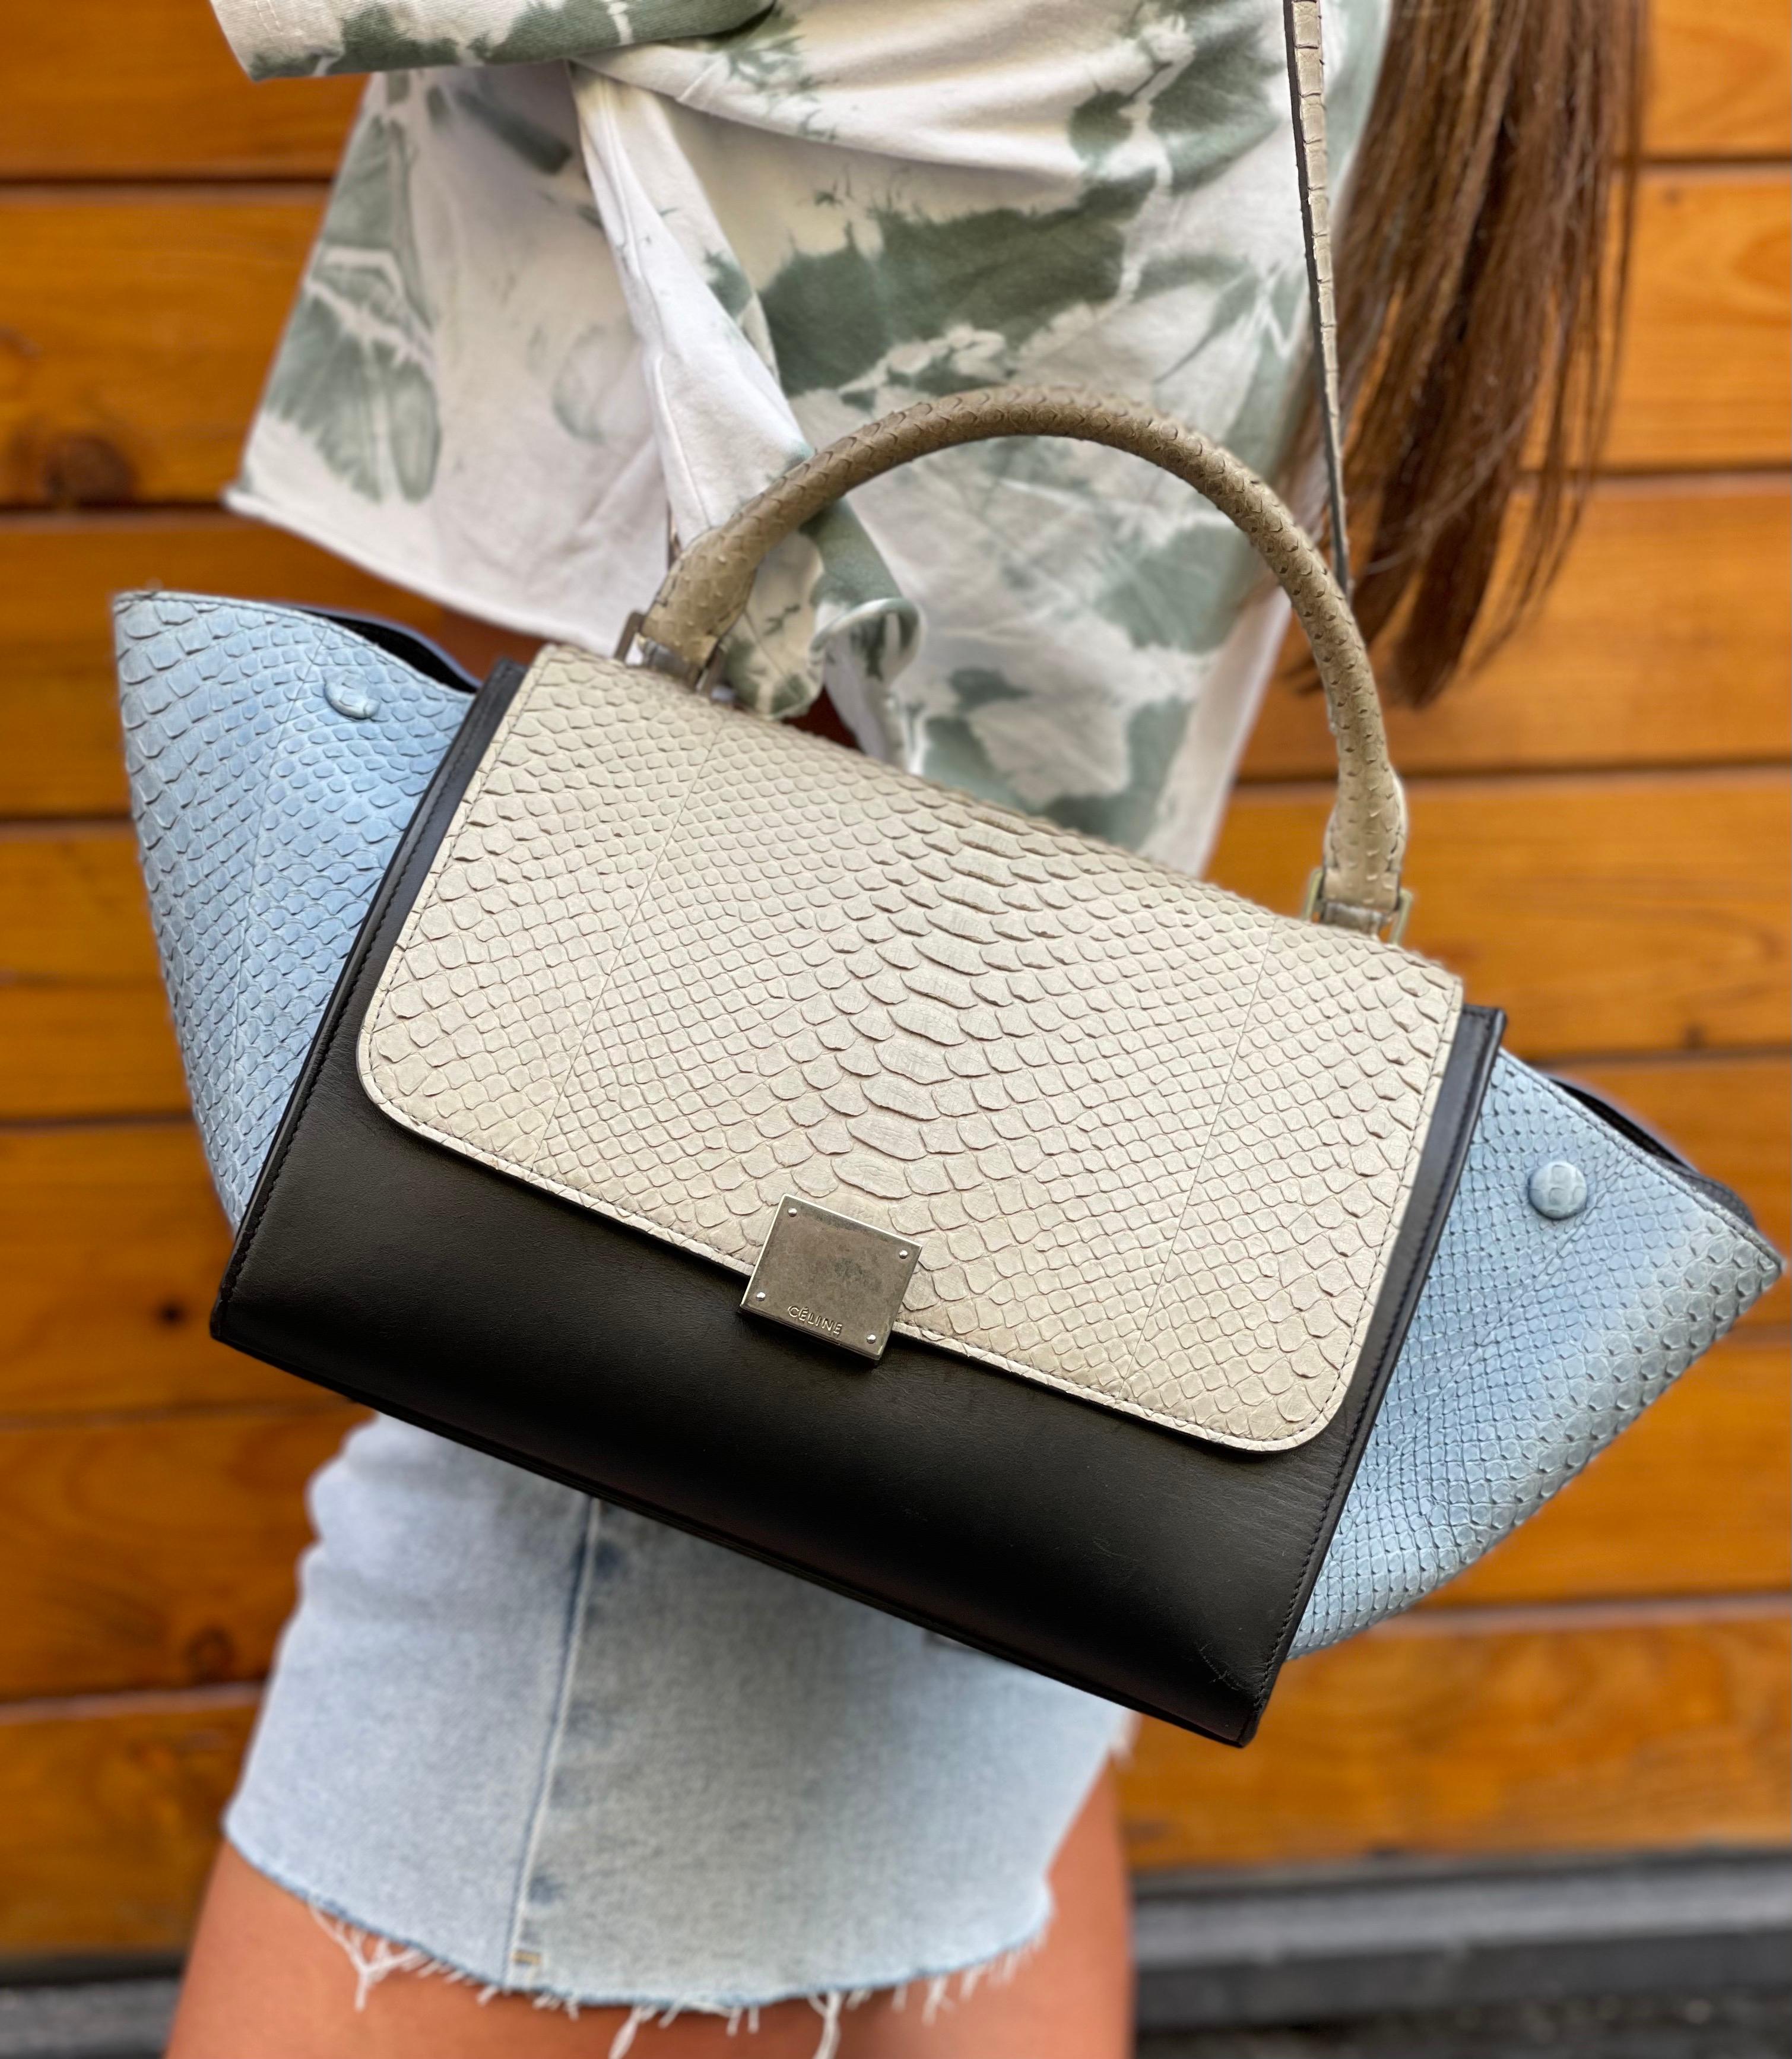 Celine bag, made of light blue and gray python leather.
Equipped with a flap with interlocking closure, internally lined in black leather, very roomy.
Equipped with a central handle and a removable and adjustable shoulder strap. It seems in perfect